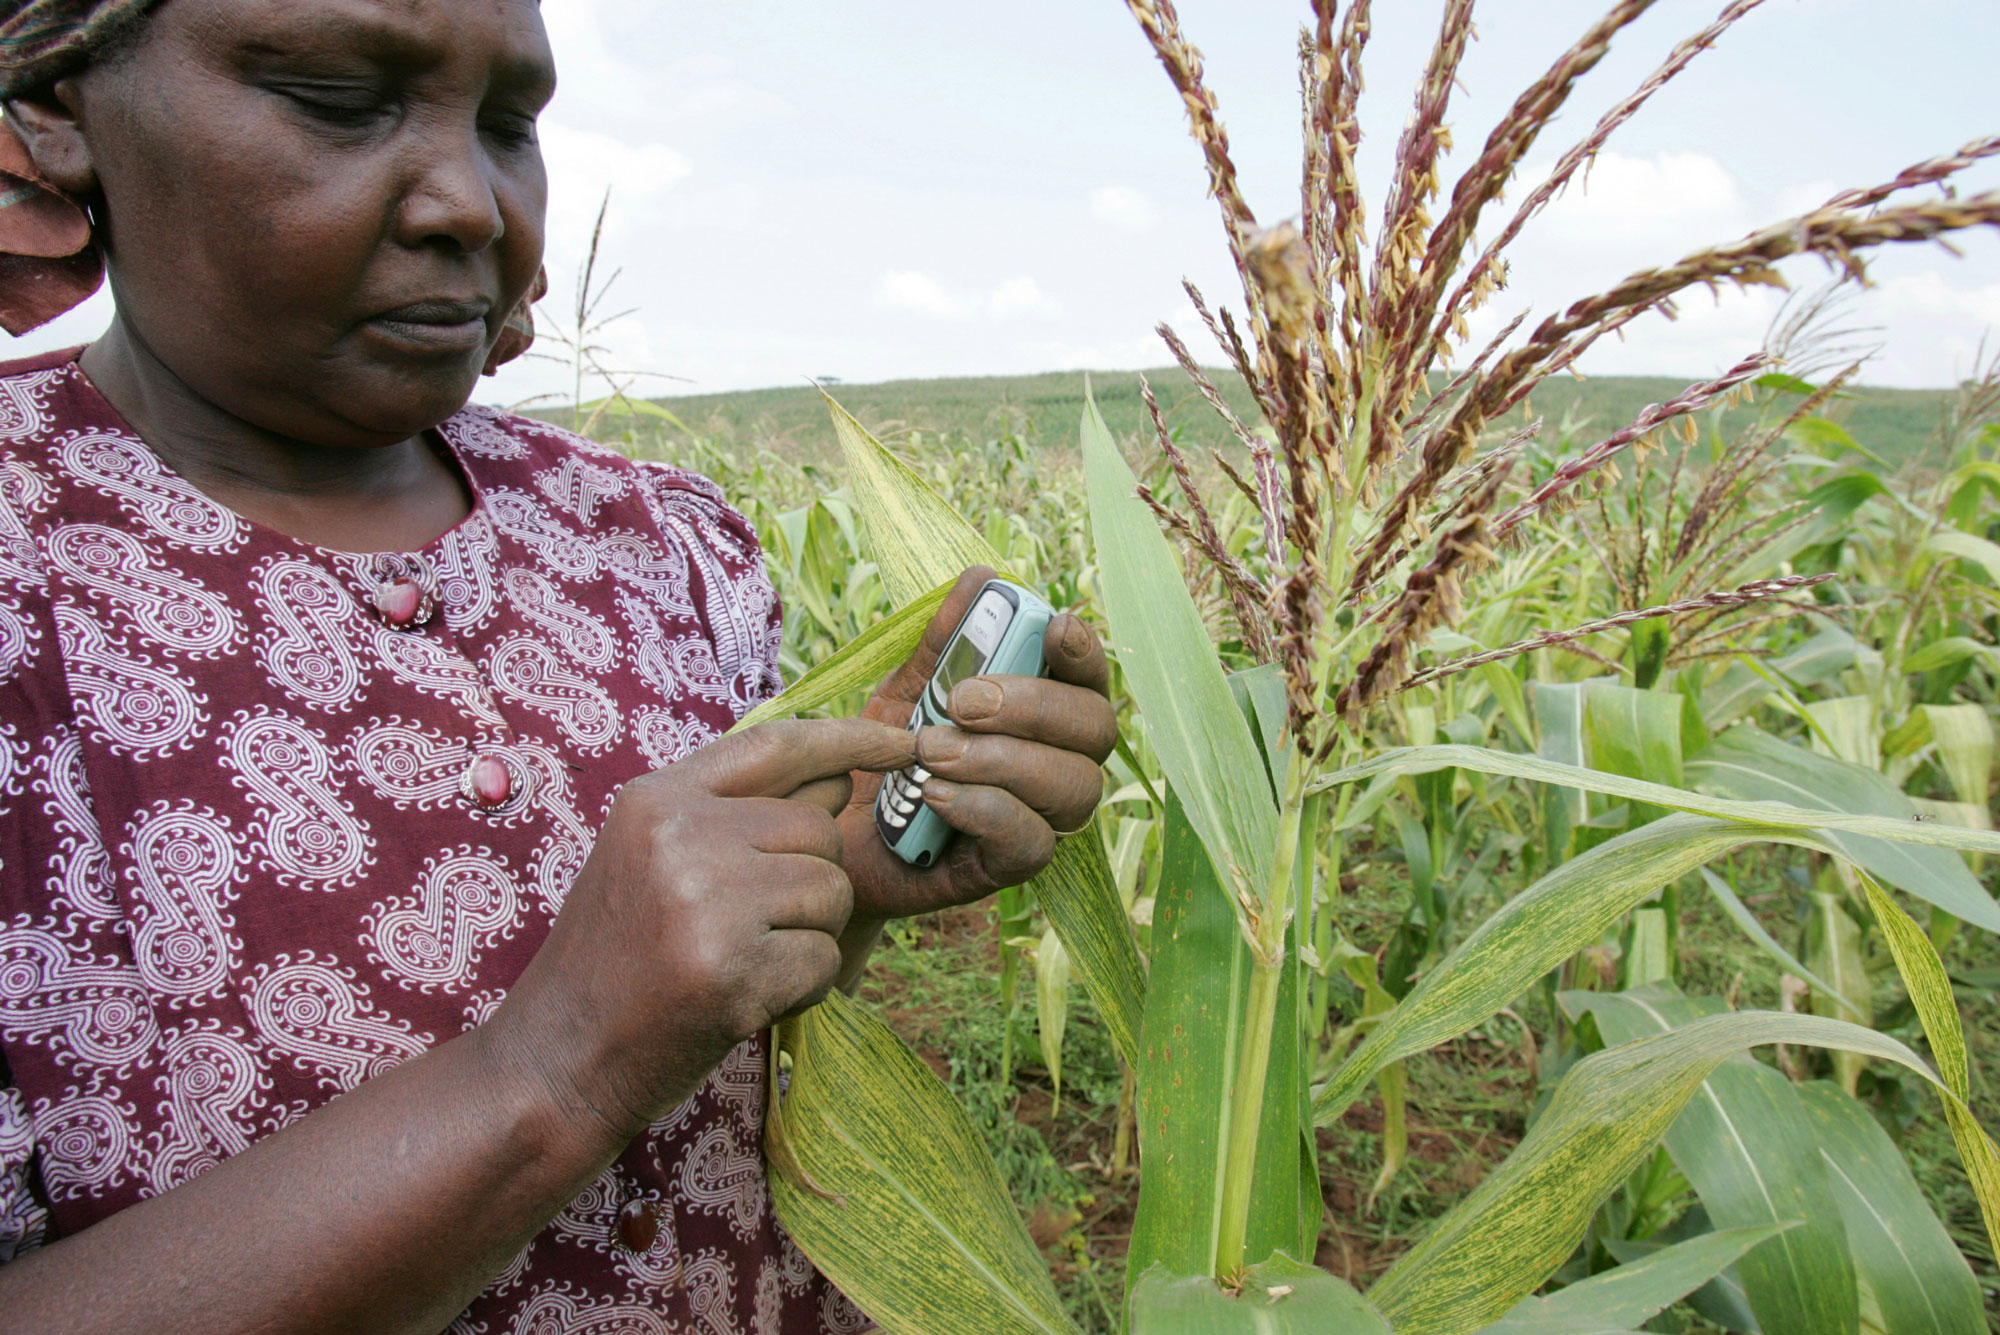 Developing a reporting tool to strengthen women's land rights in Kenya